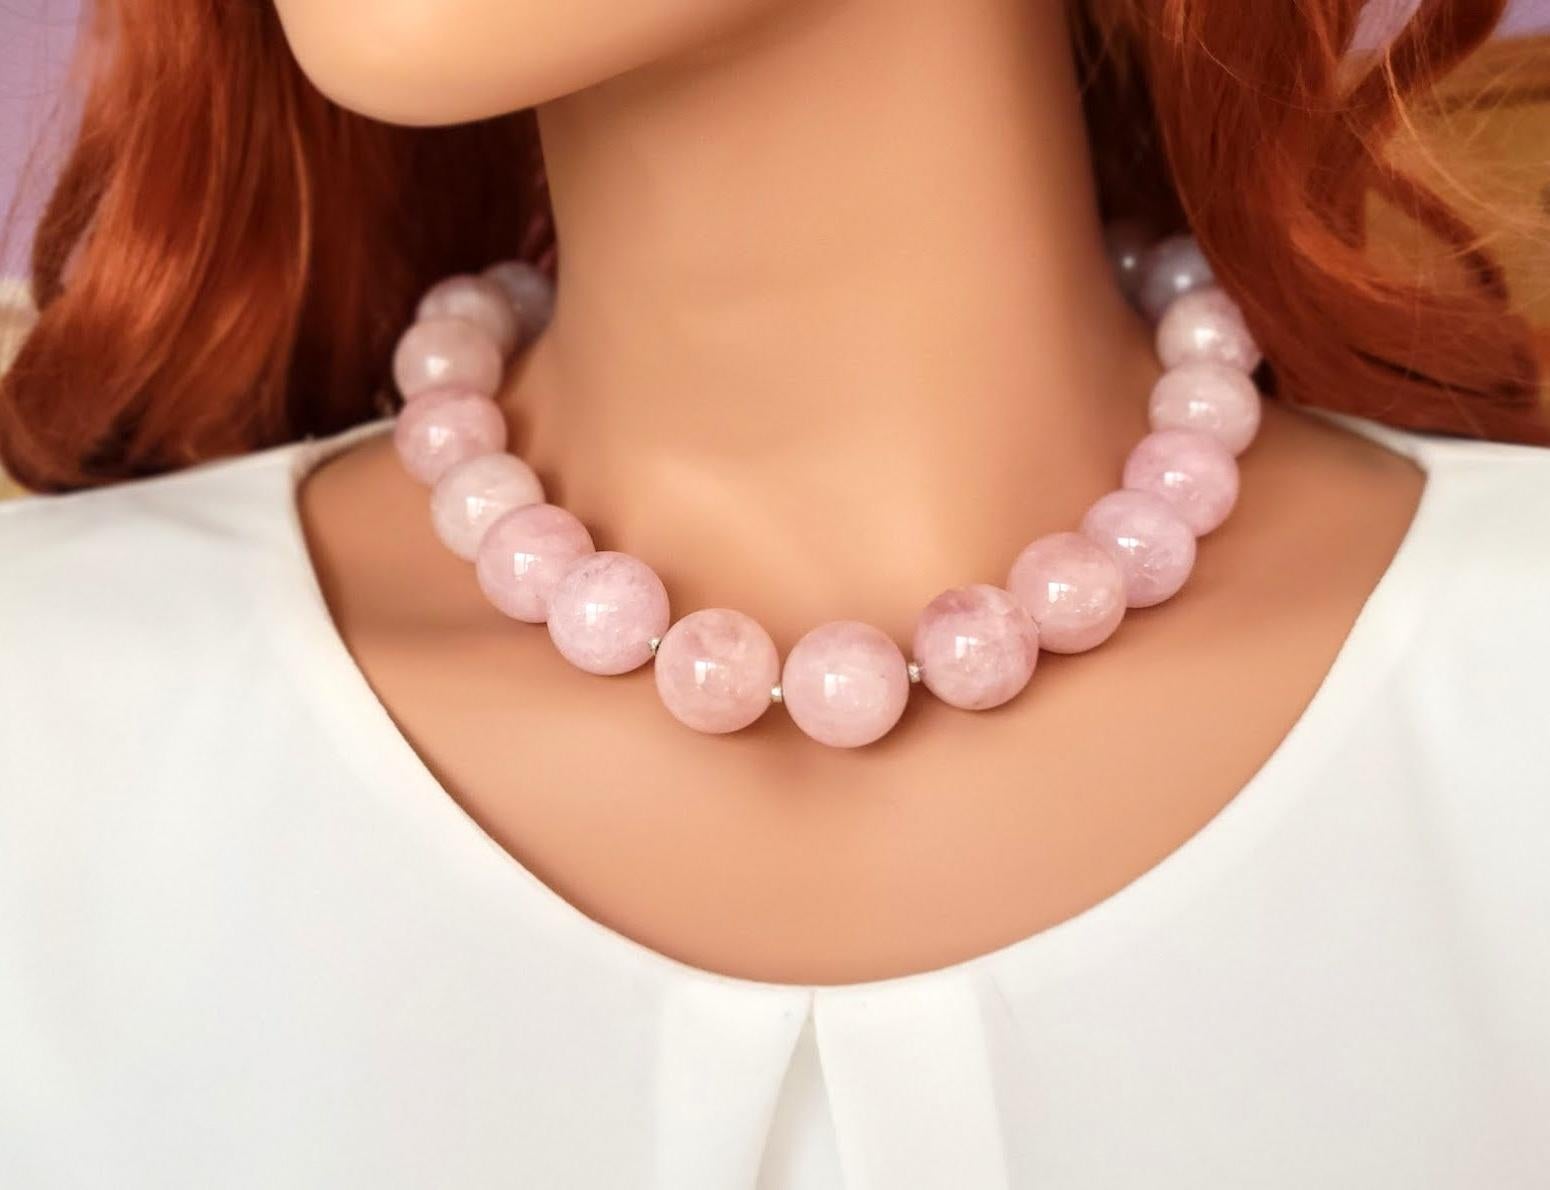 The length of the necklace is 18 inches (45.7 cm). The rare size of the smooth round beads is 20 mm.
The color of the beads is a soft, pale, peachy pink. Very gentle, soft pastel colors! Huge statement beads of Pure Beryl! Morganite is a member of